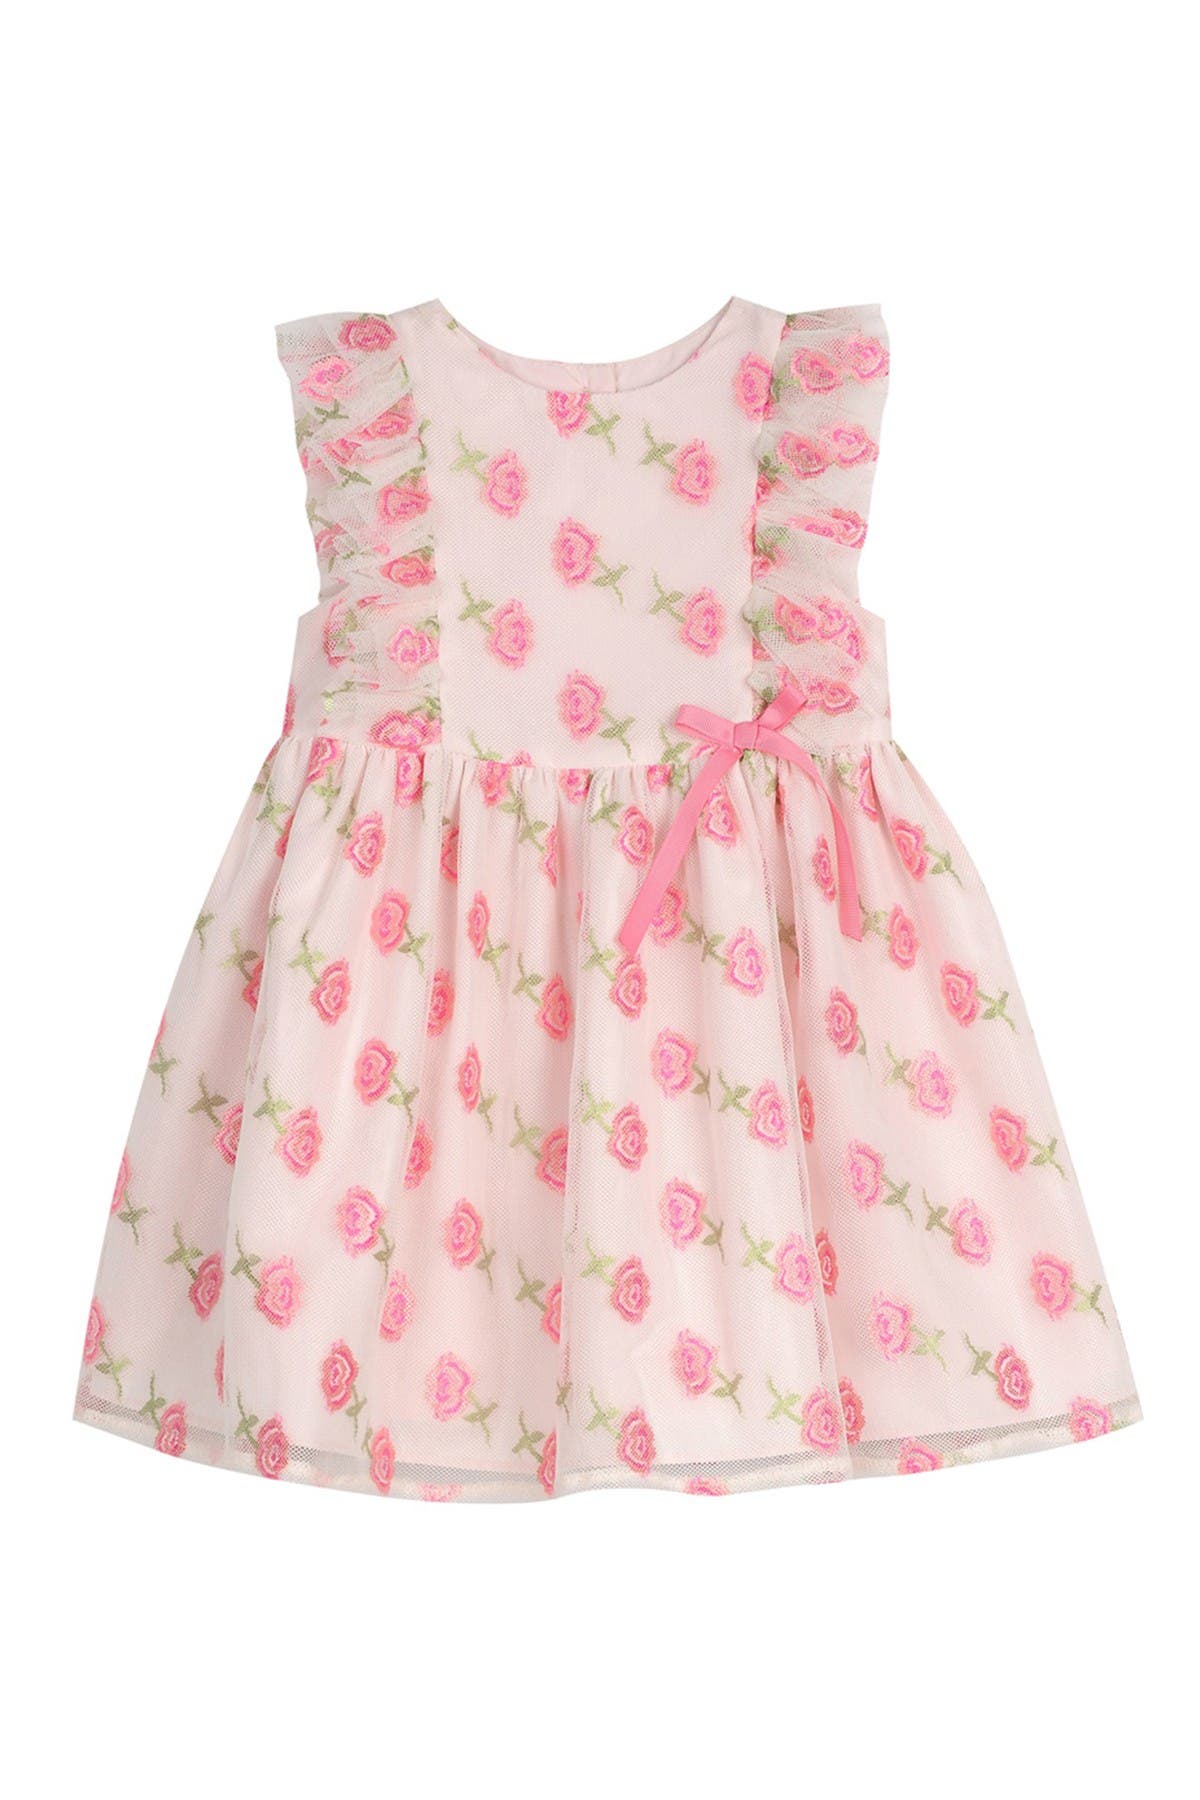 laura ashley baby clothes